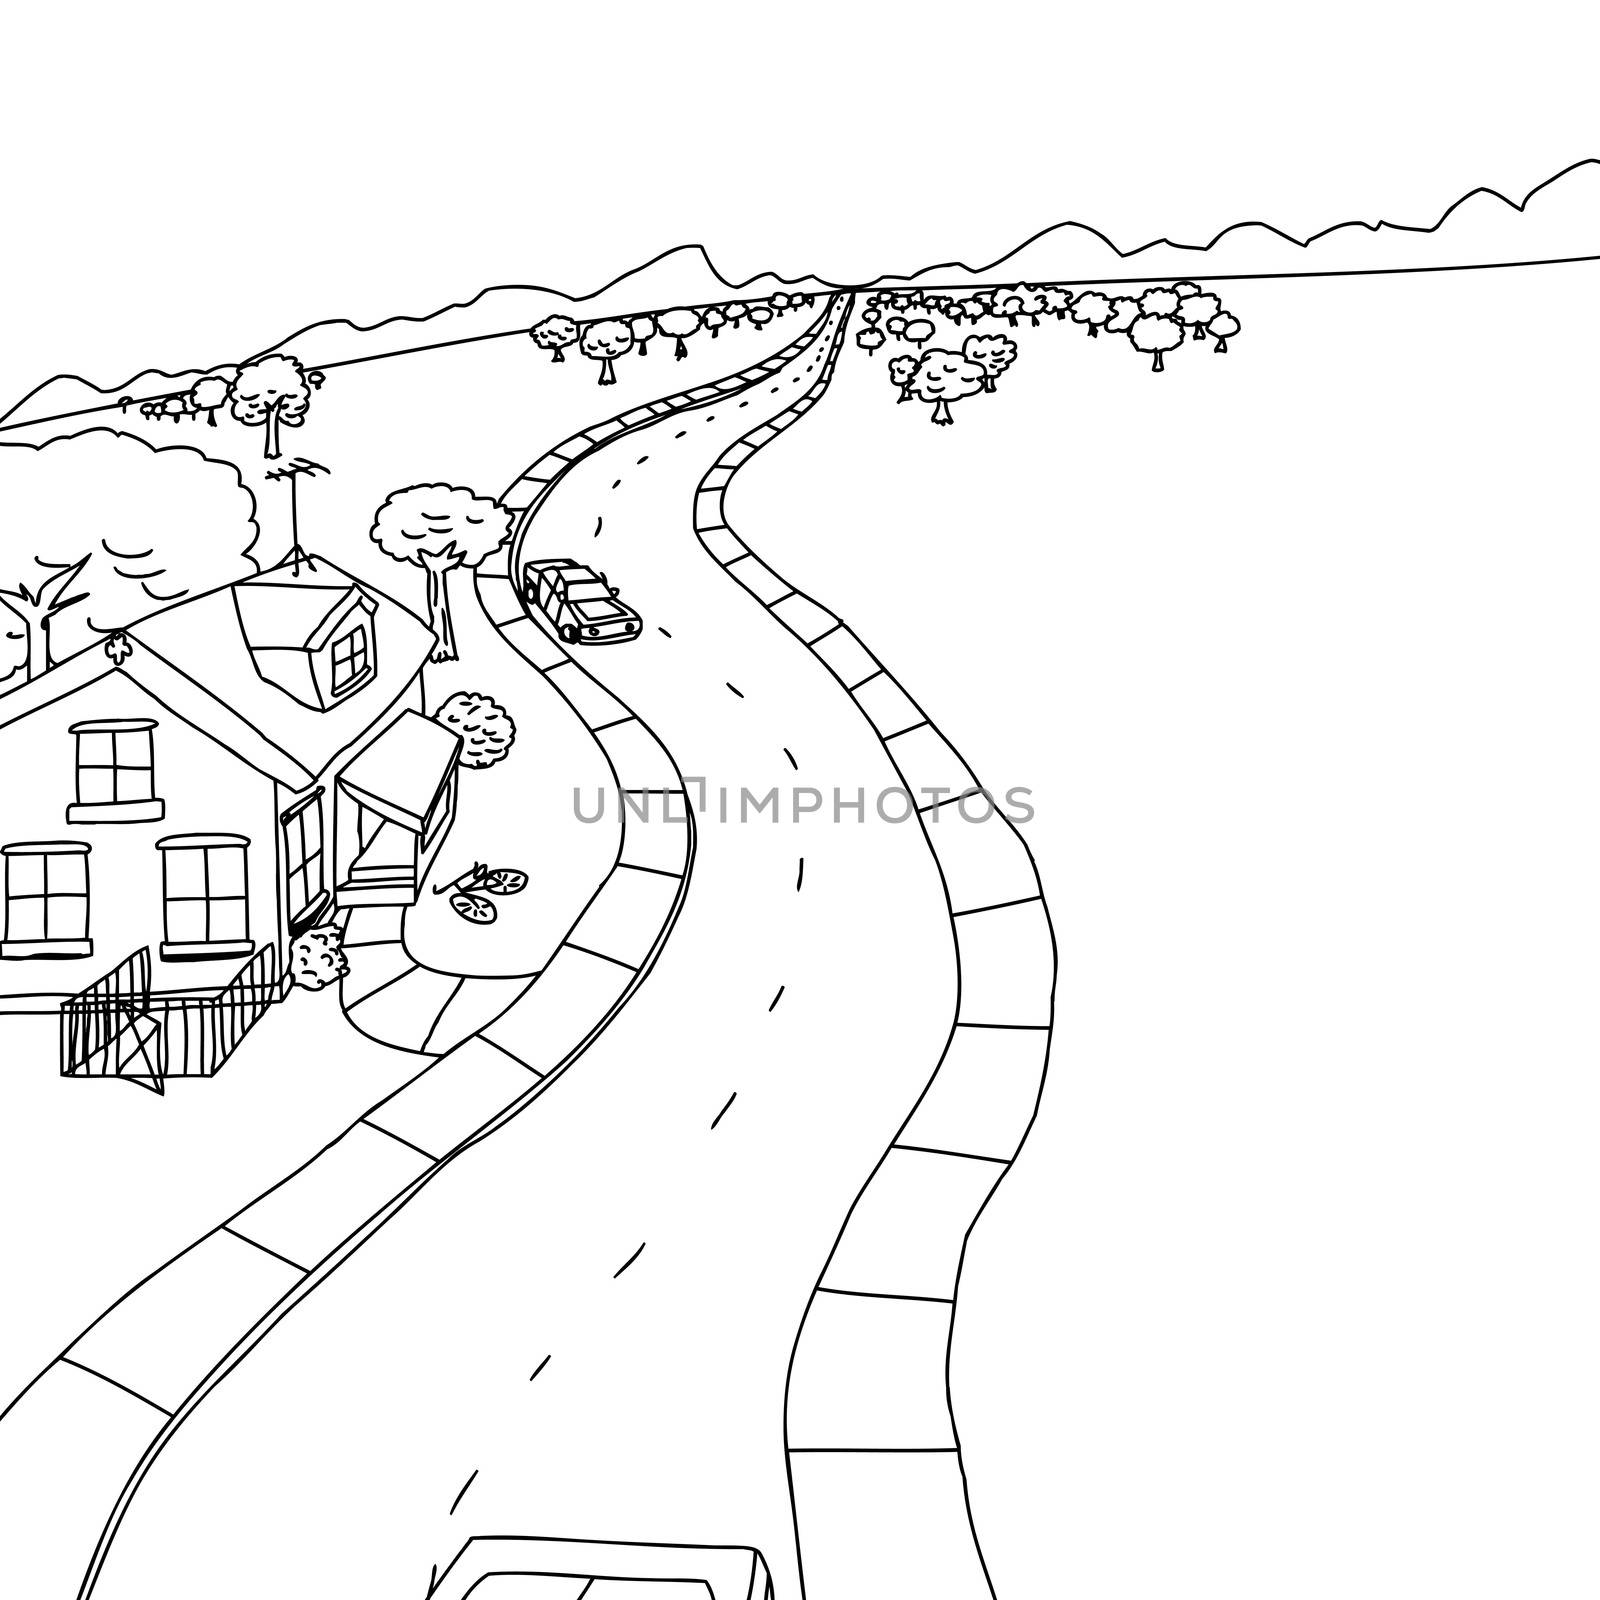 Outline drawing of house with trees along road